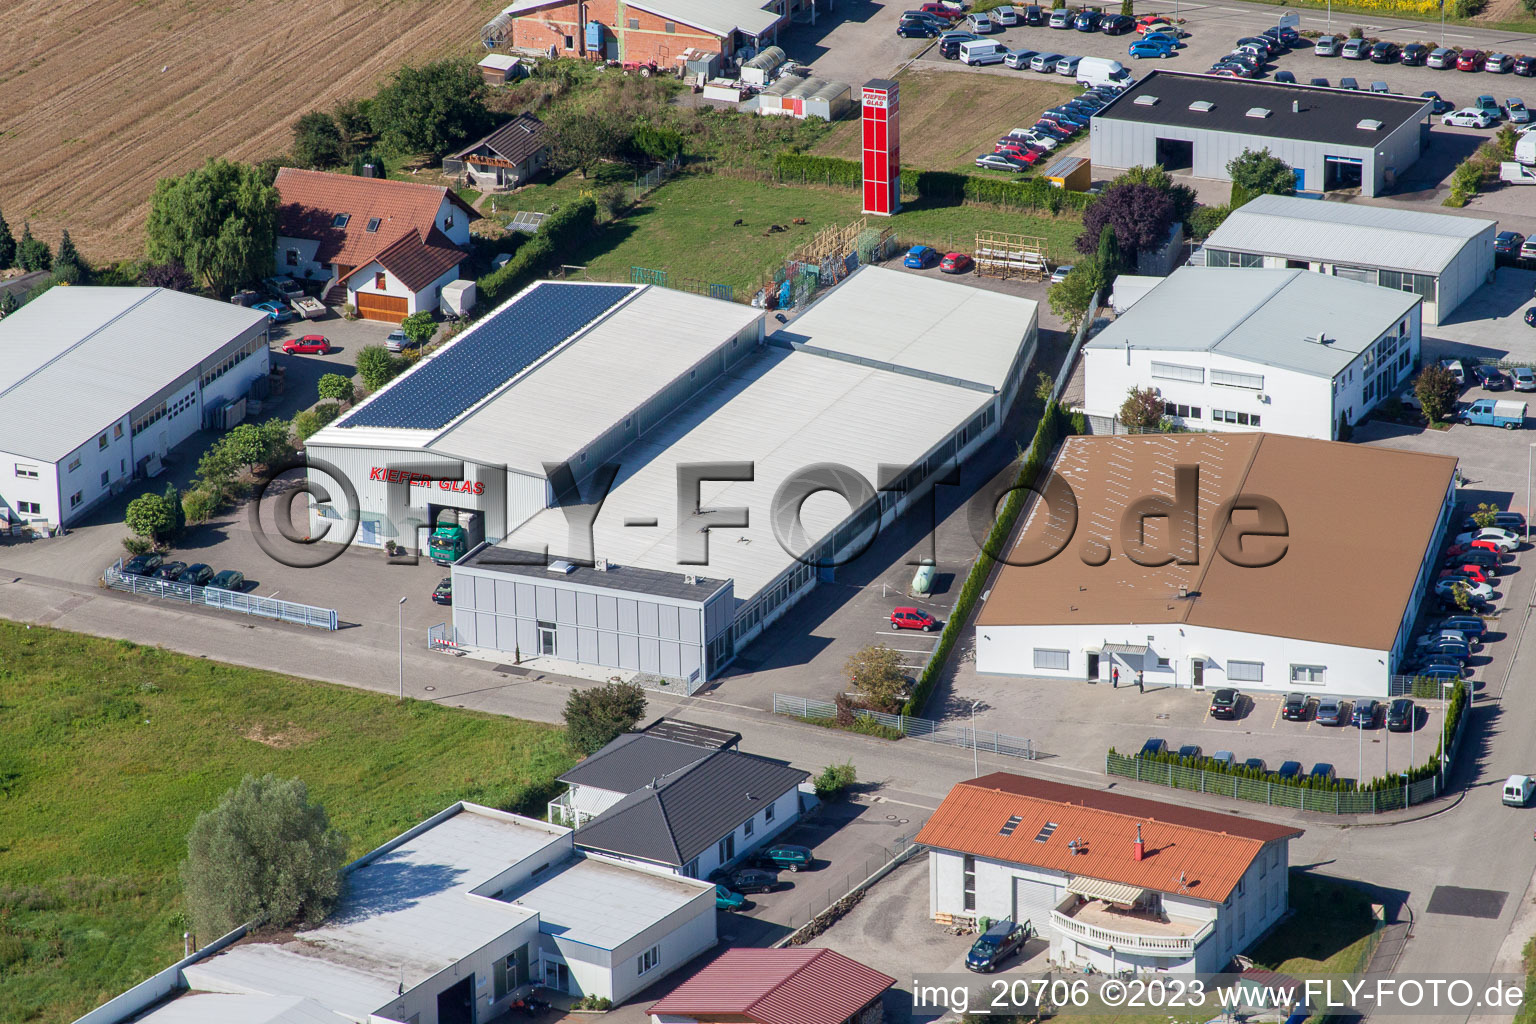 South commercial area in the district Urloffen in Appenweier in the state Baden-Wuerttemberg, Germany